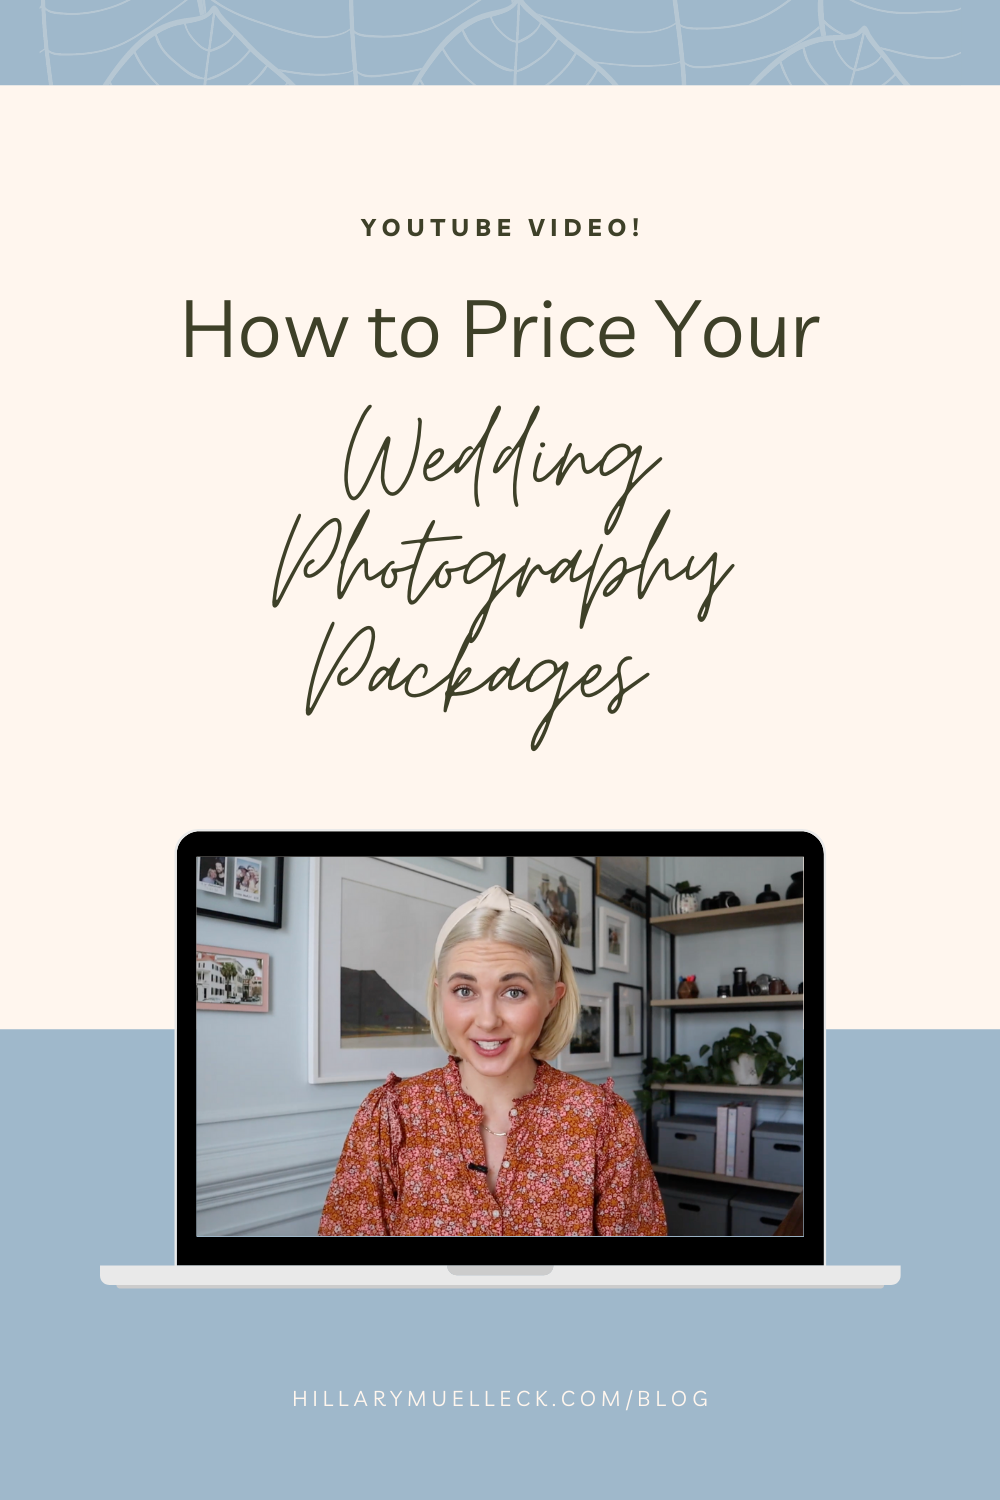 How to calculate your wedding photography packages so that you actually make money as a photographer, shared by Hillary Muelleck